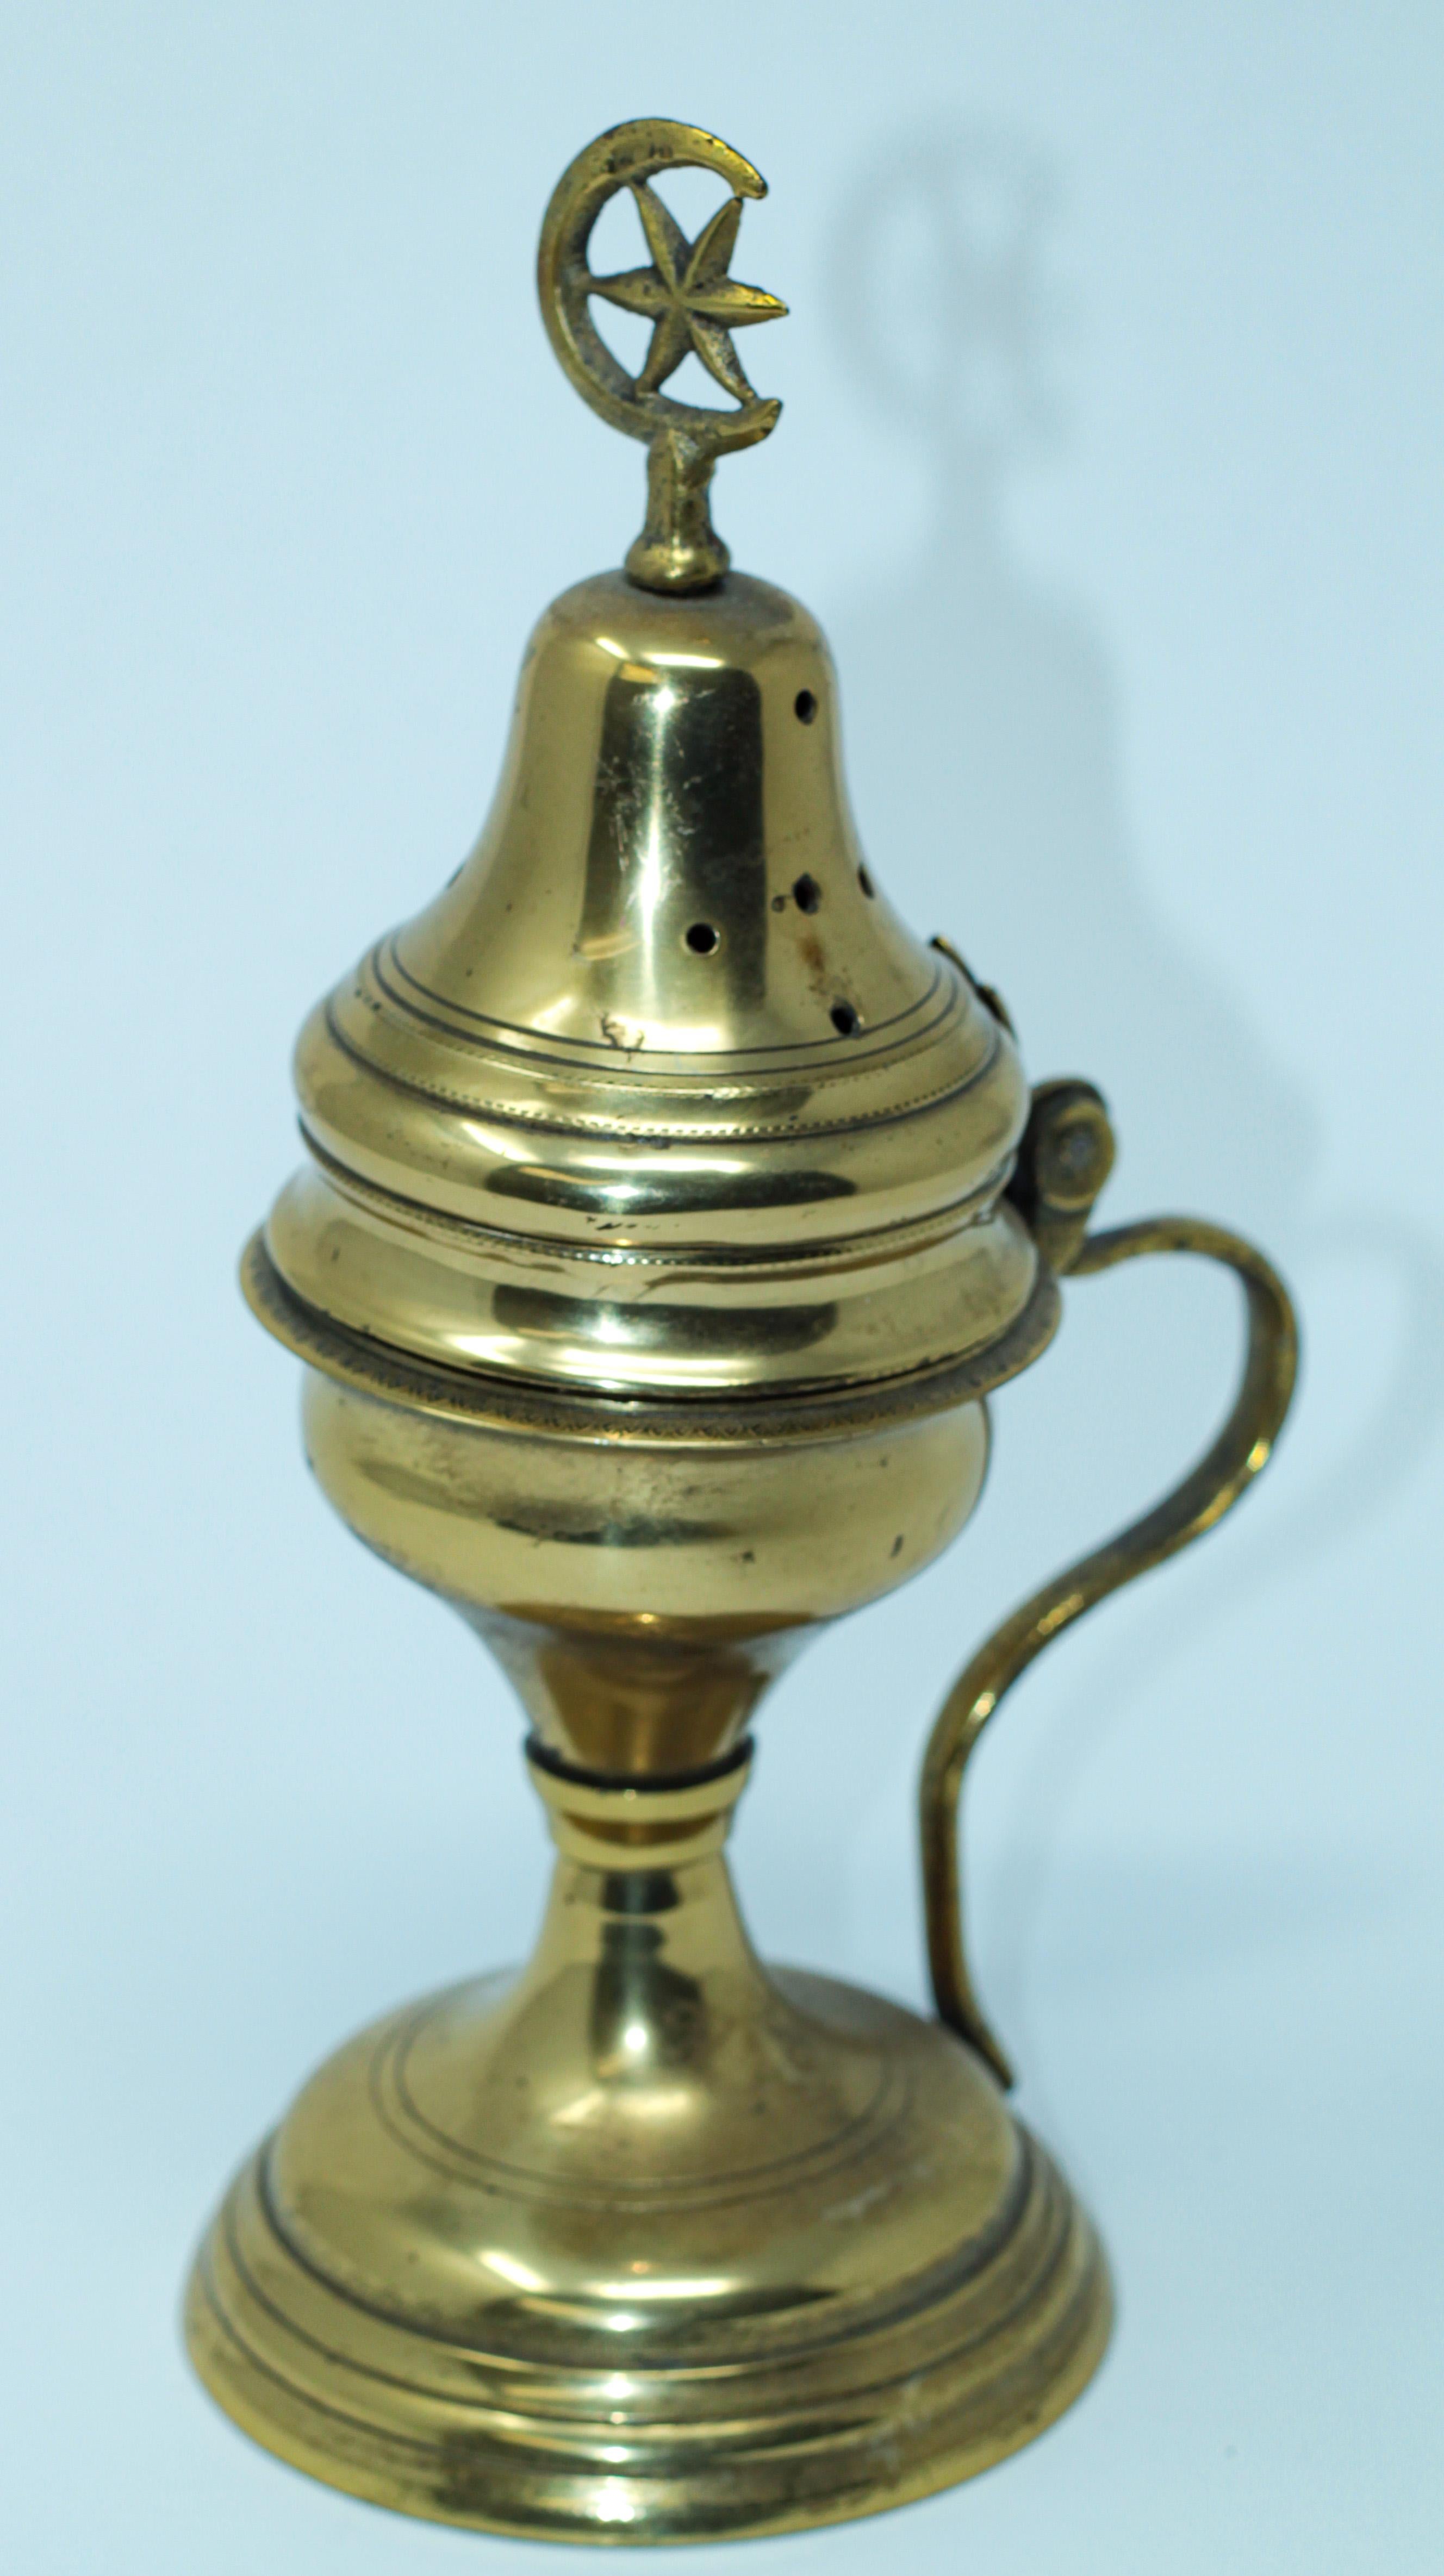 Polished Brass Incense Burner with Crescent Moon and Star Symbol 2